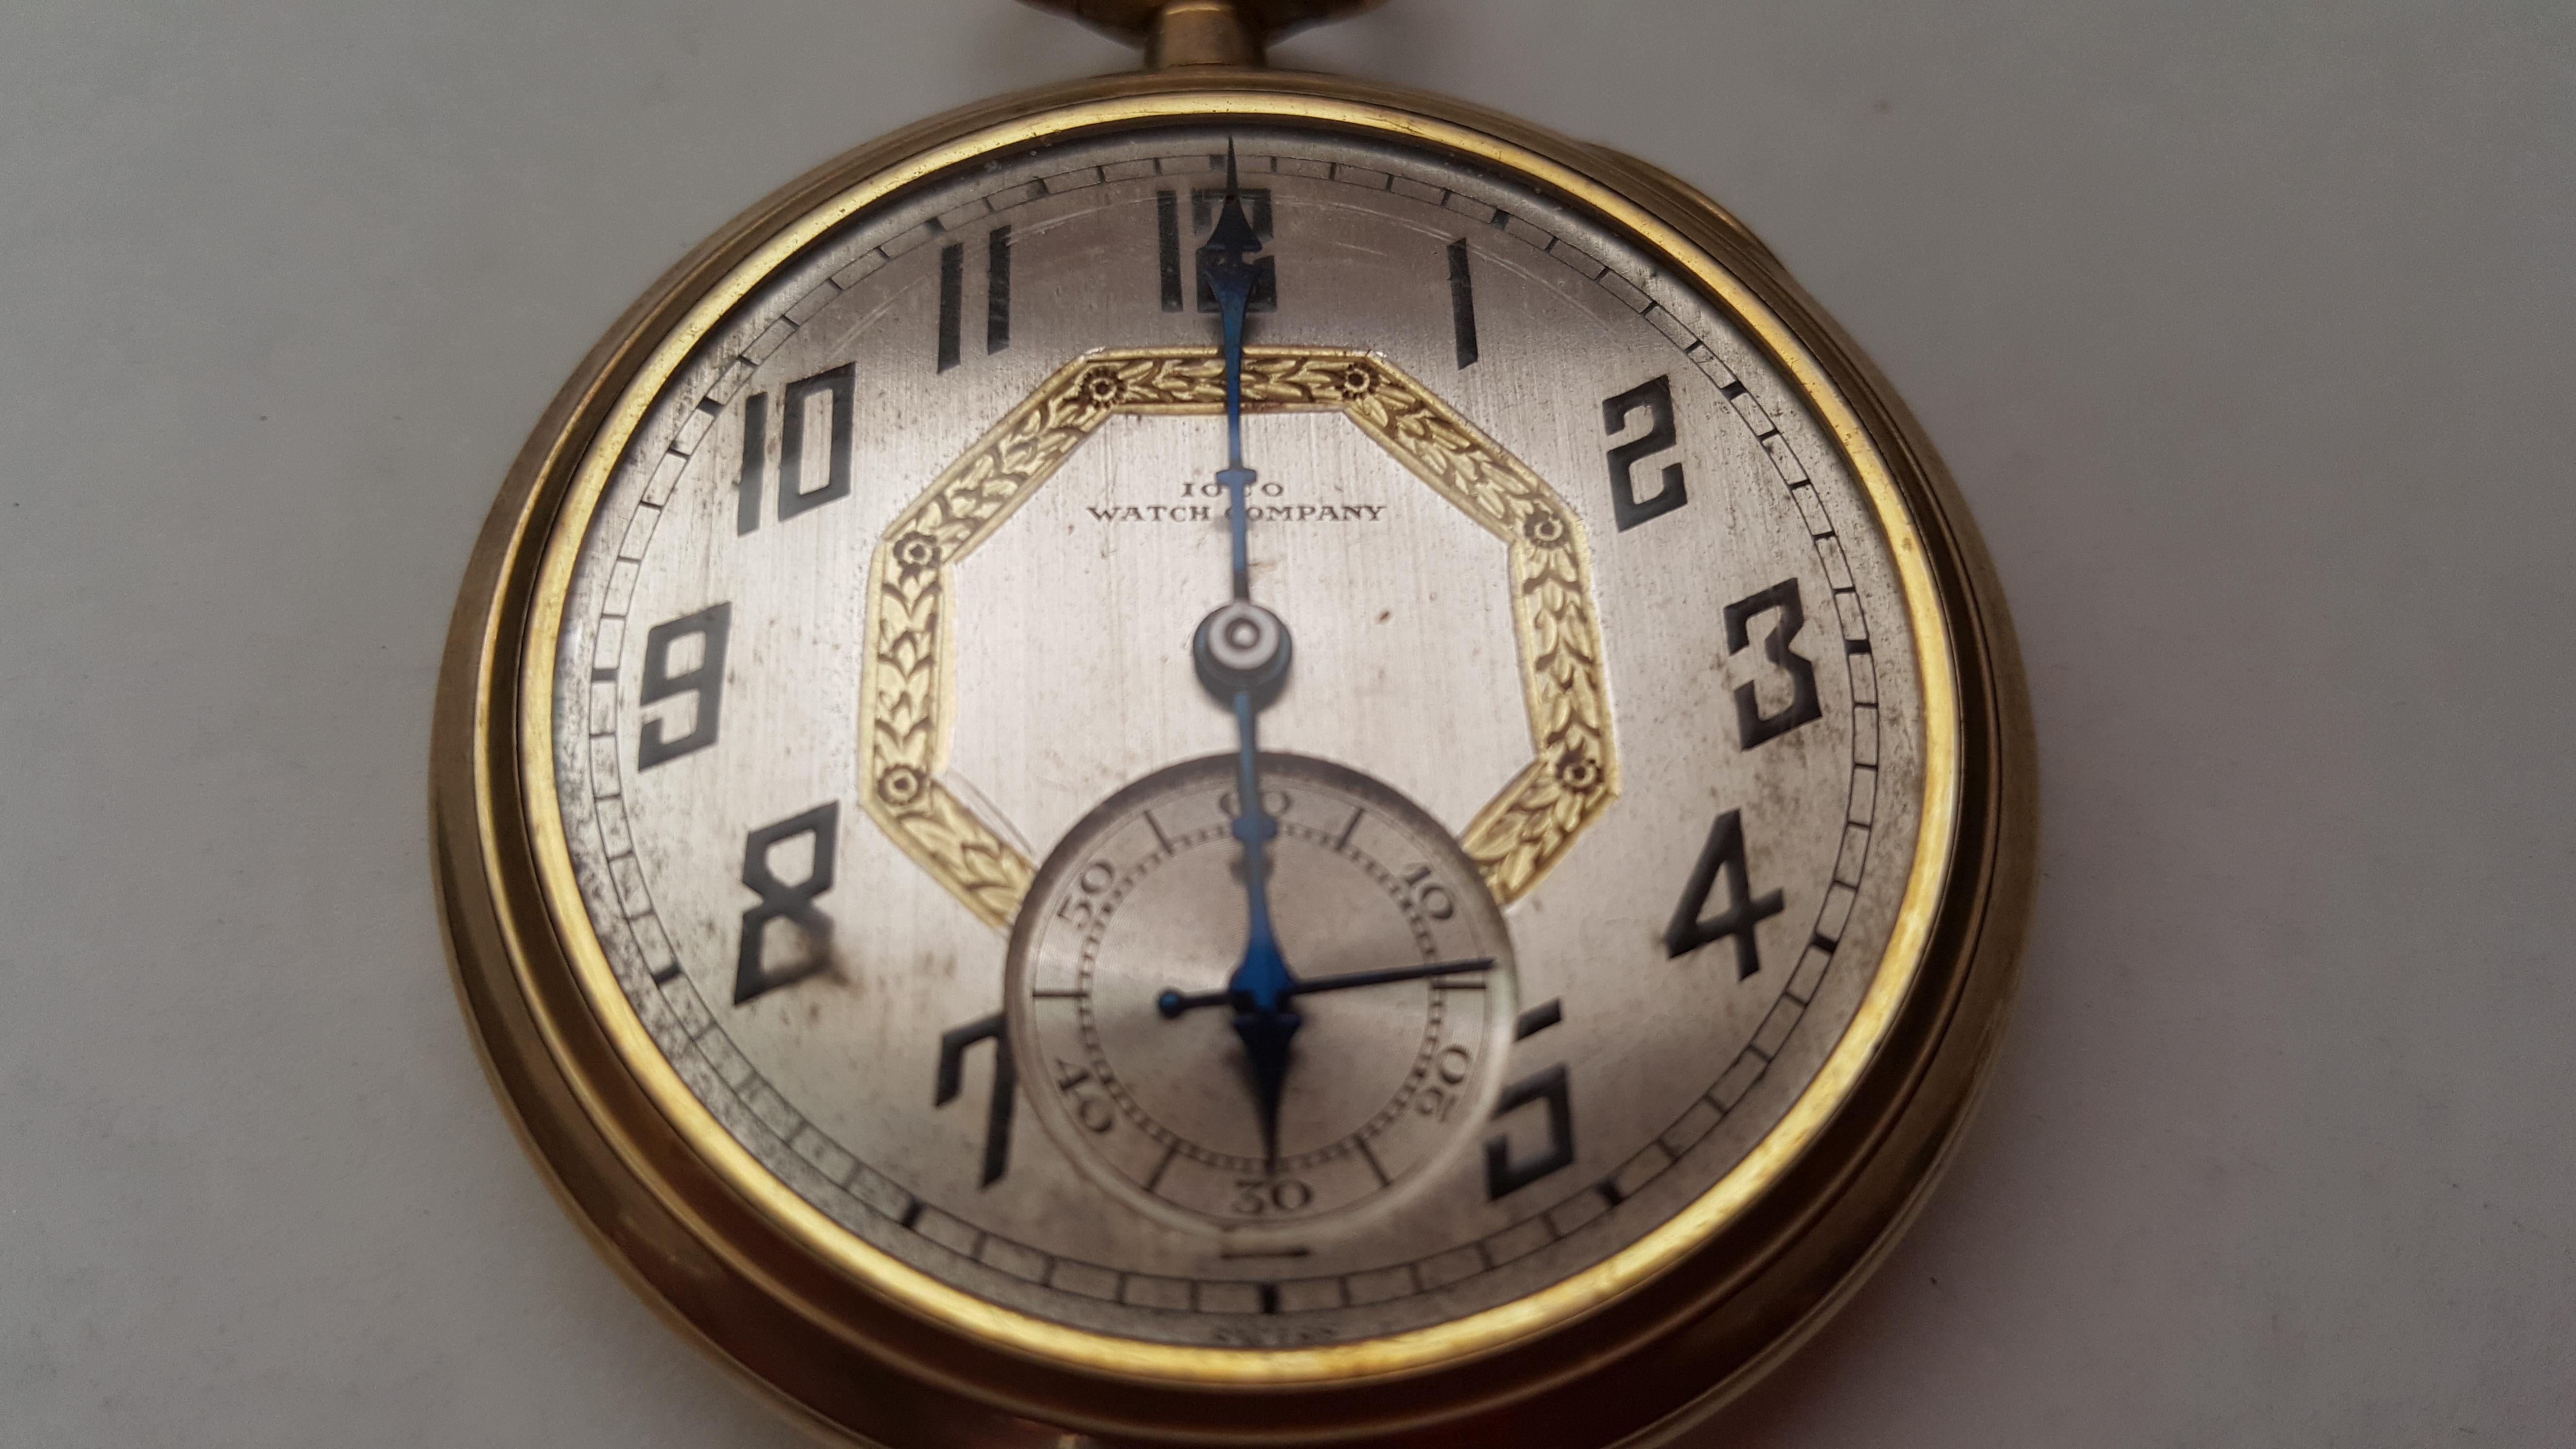 Vintage Ioco Watch Company Pocket Watch Gold-Plated, White Satin Finish Face 1